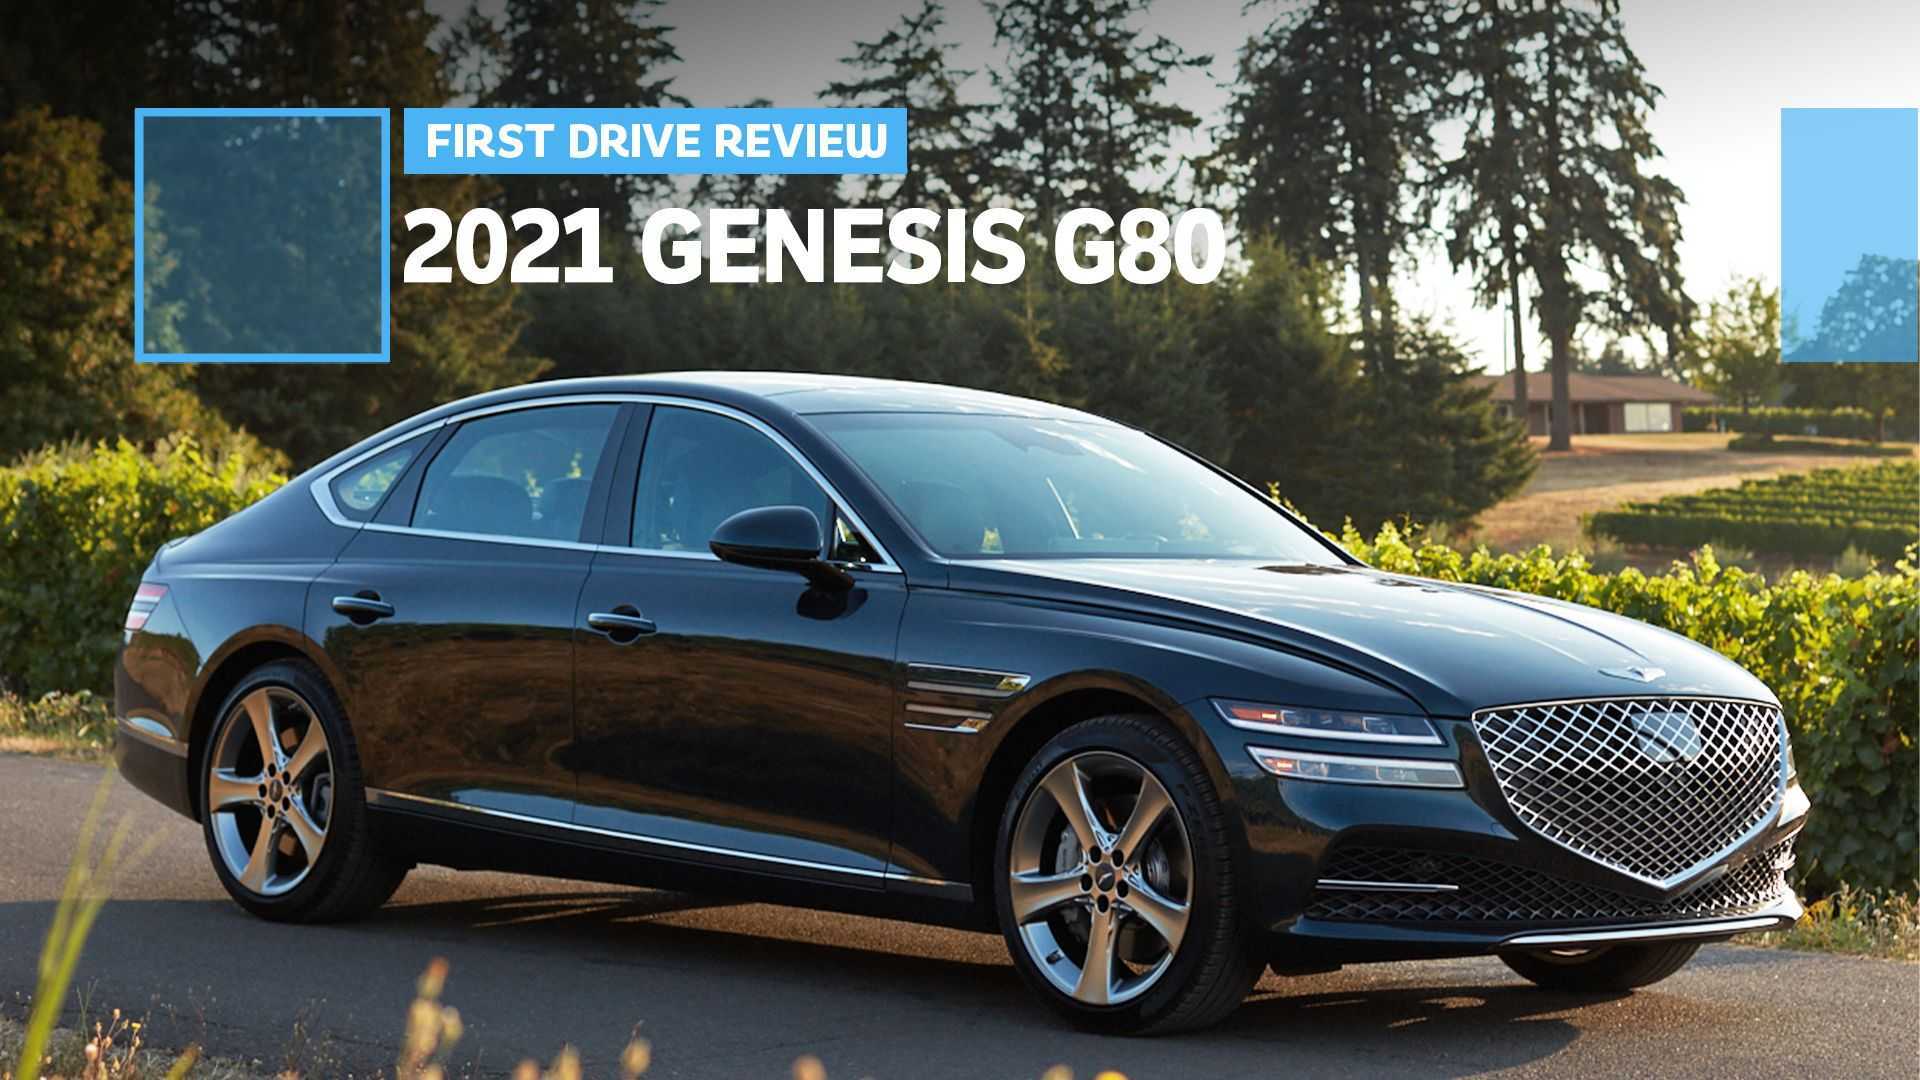 2021 Genesis G80 First Drive Review: Game Changer